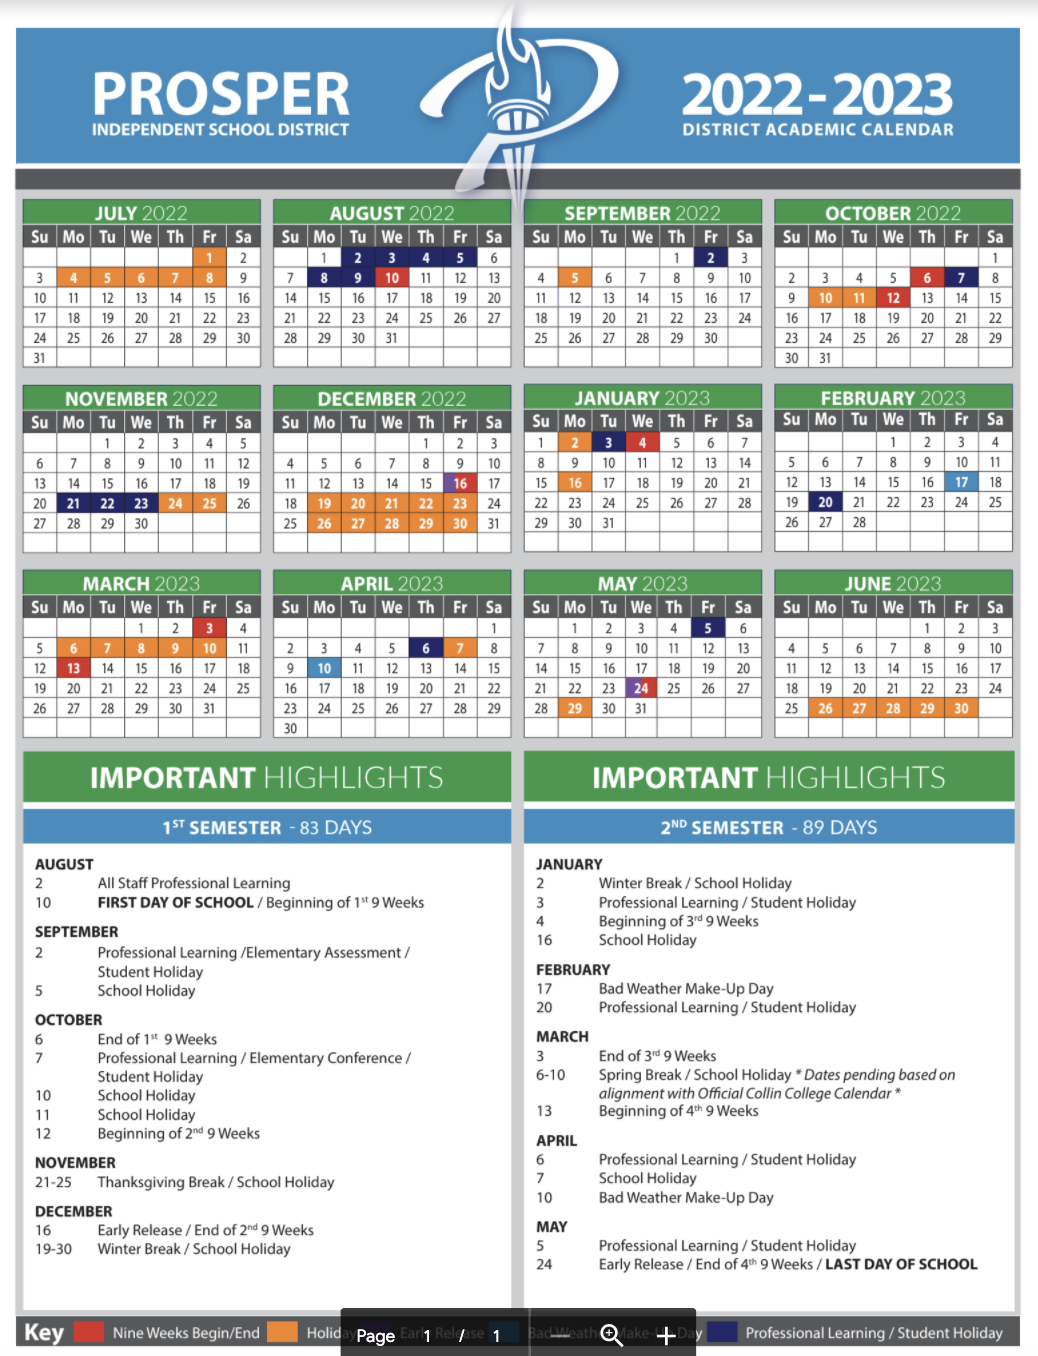 Mckinney Isd Calendar 2022 2023 Here Are Prosper Isd's School Calendars For The 2022-2023 And The 2023-2024  School Years | Cities | Checkoutdfw.com